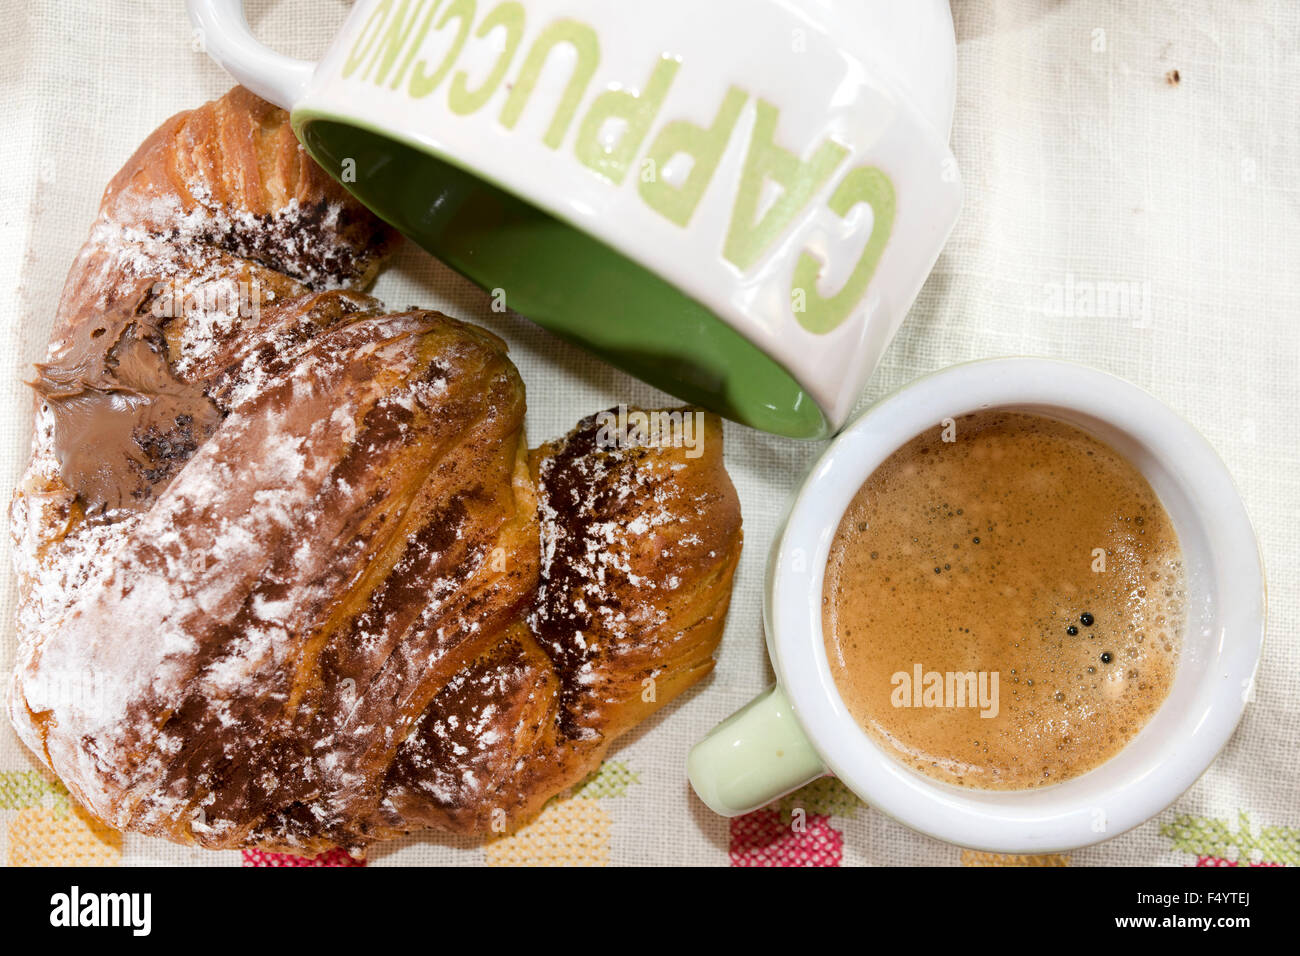 croissants and coffee espresso for an Italian breakfast Stock Photo